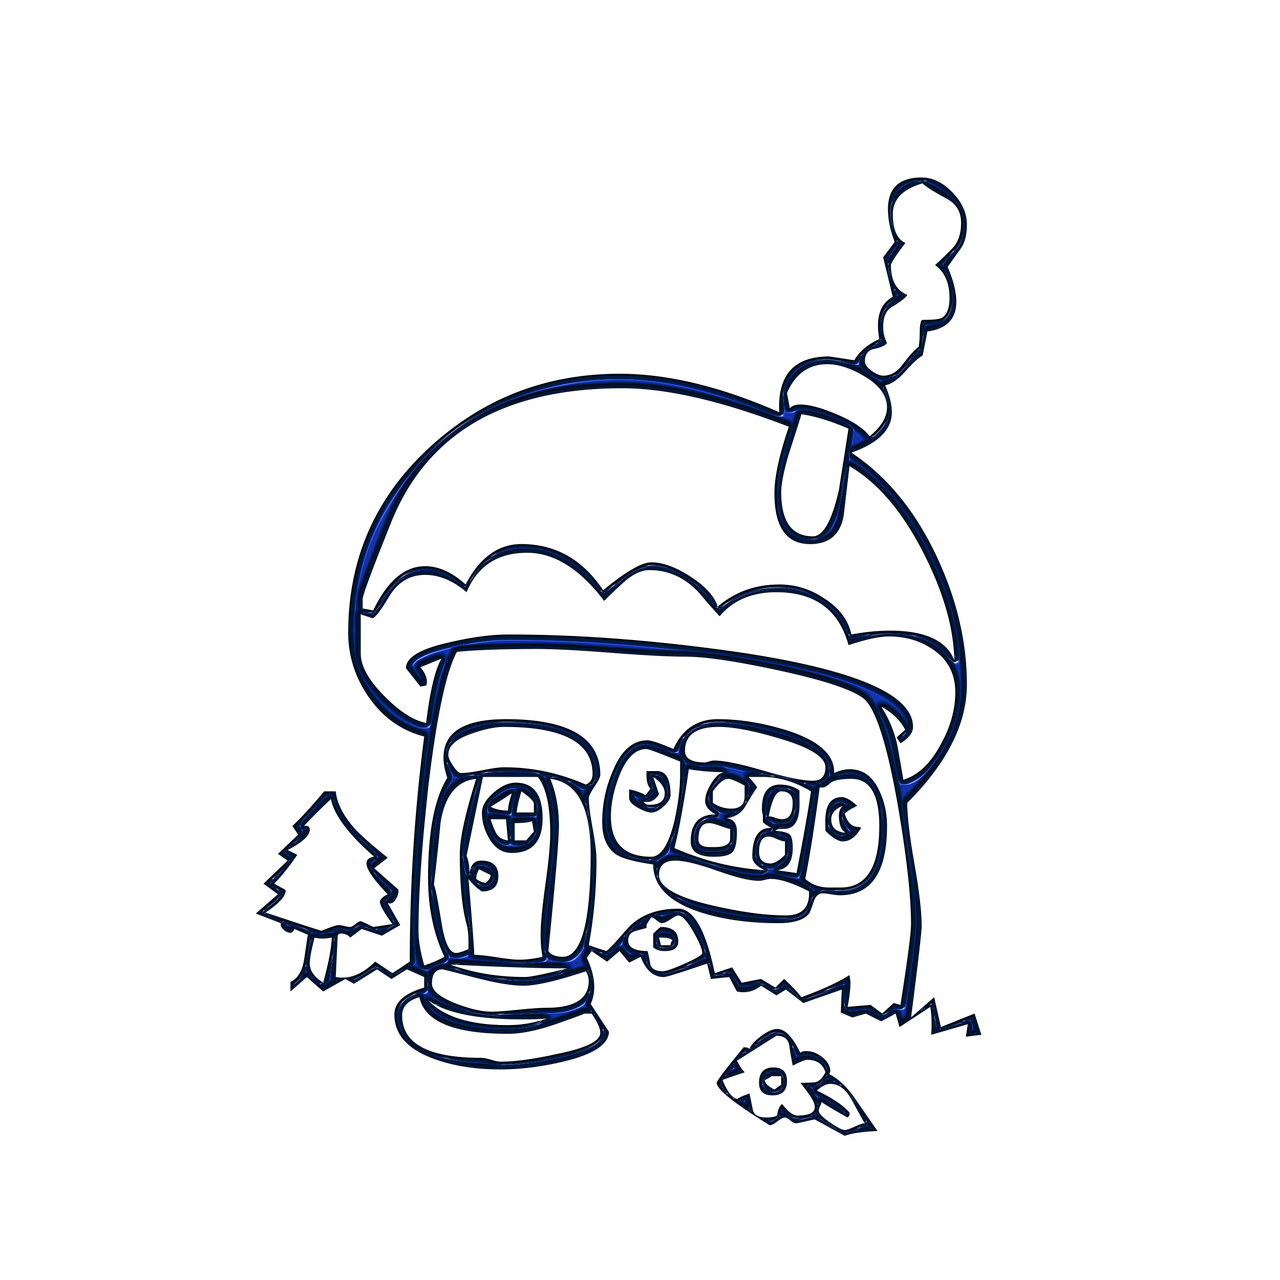 a drawing of a mushroom house on a black background, concept art, graffiti, blue light, blurred and dreamy illustration, outlined, animatic